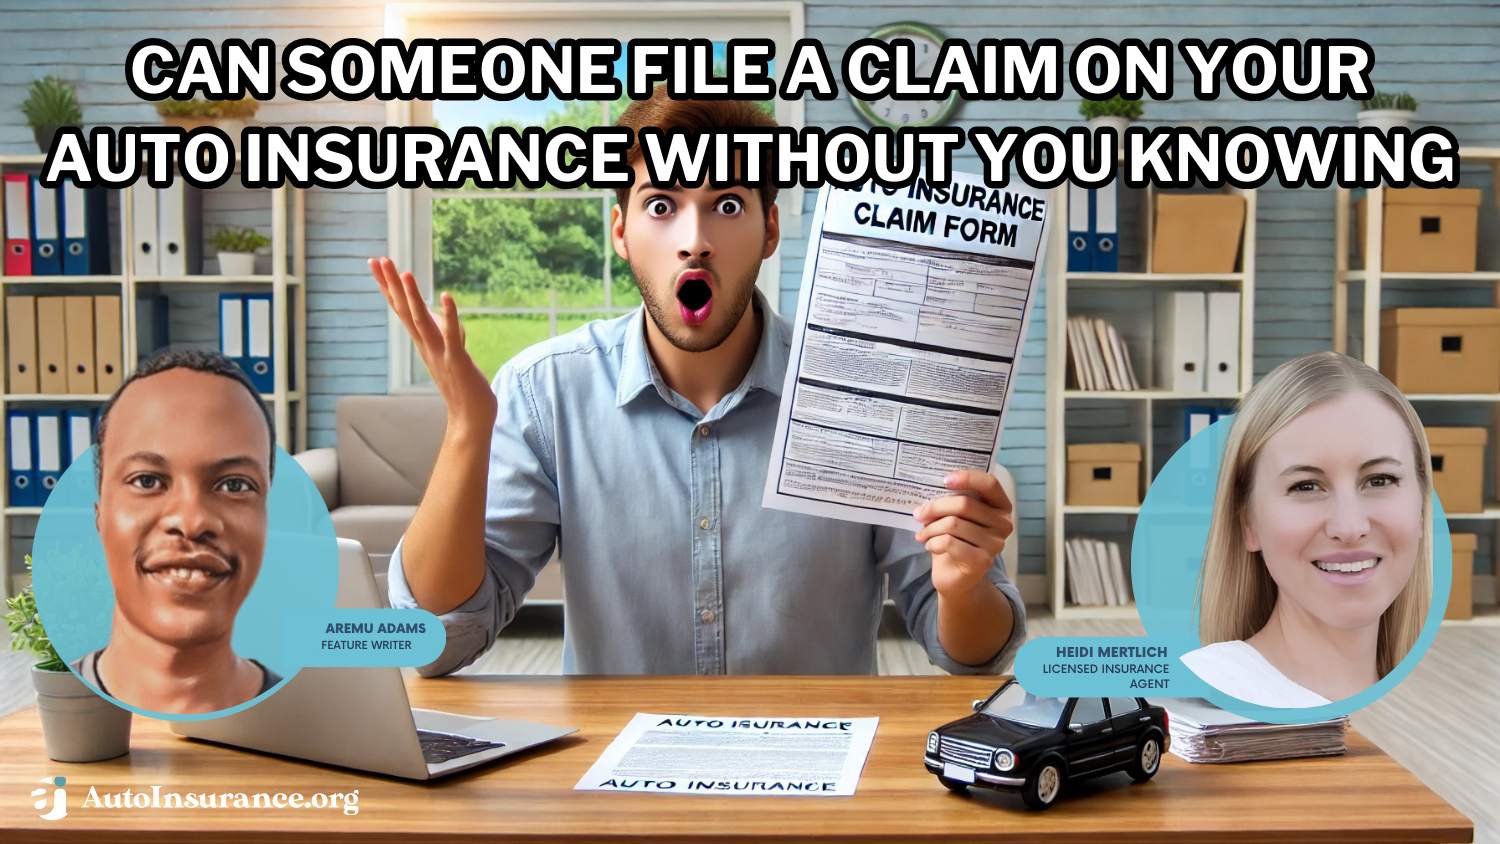 Can someone file a claim on your auto insurance without you knowing?